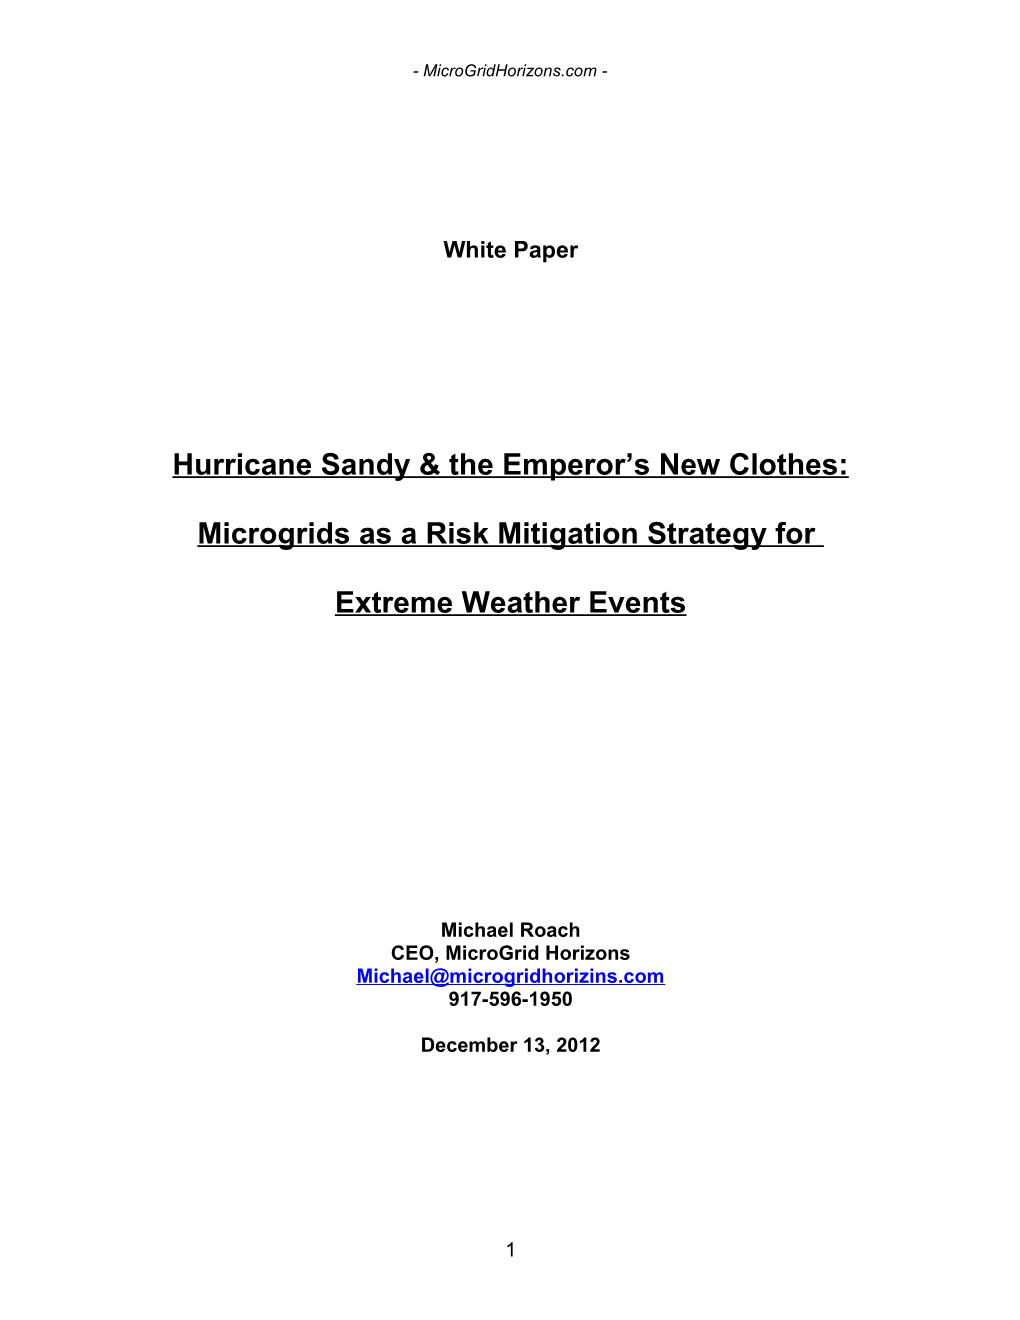 Microgrids As a Risk Mitigation Strategy for Extreme Weather Events